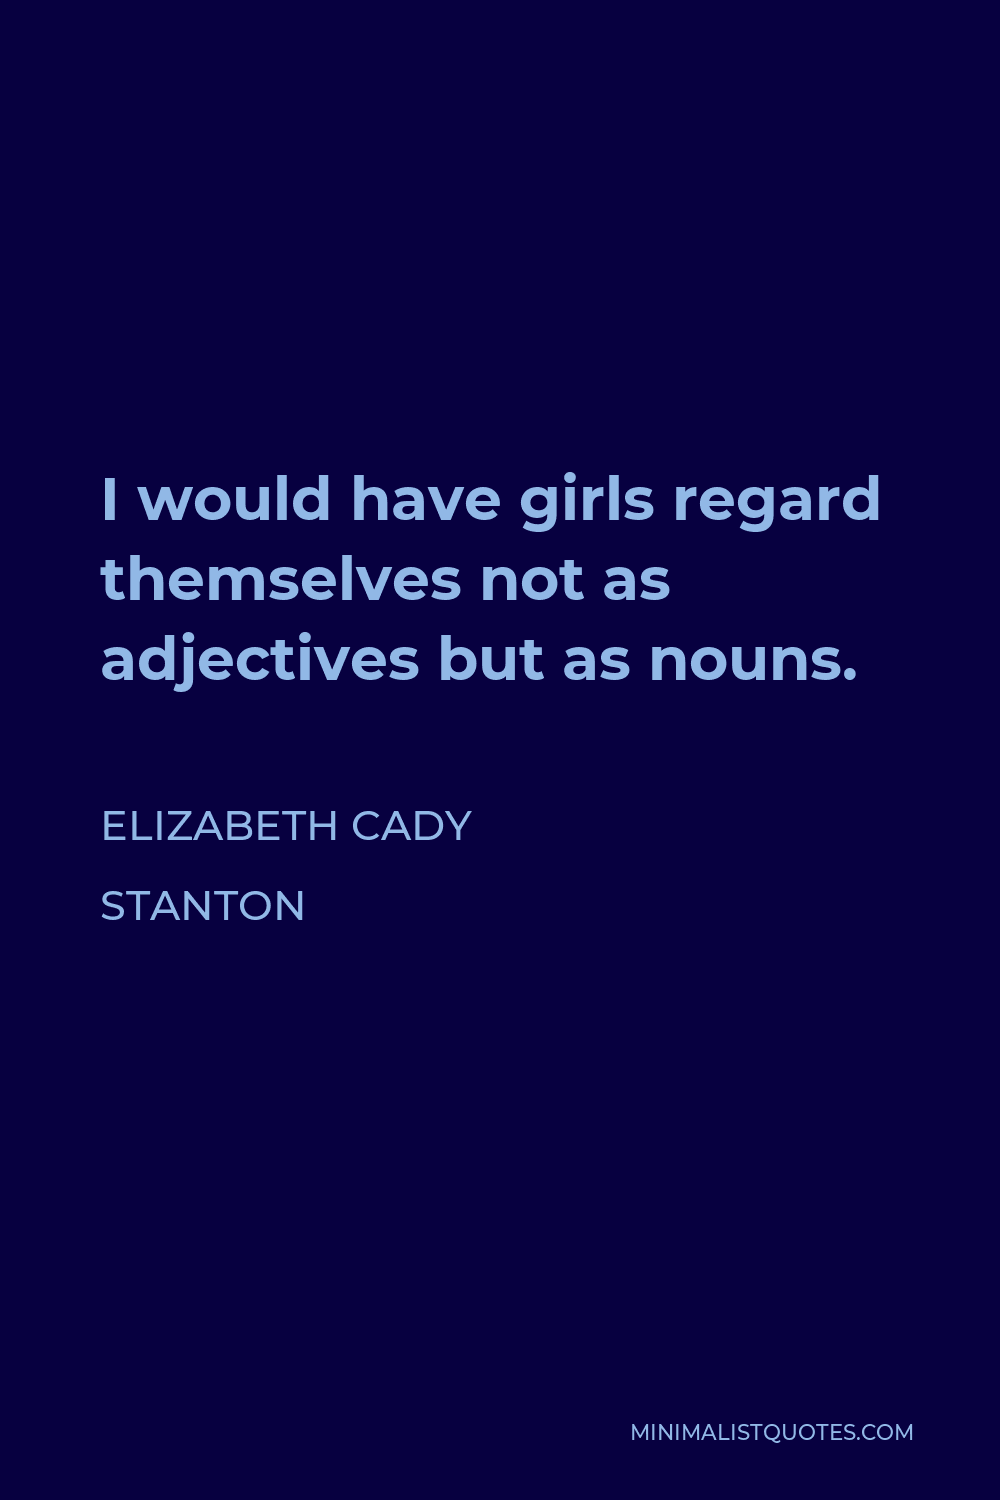 Elizabeth Cady Stanton Quote - I would have girls regard themselves not as adjectives but as nouns.